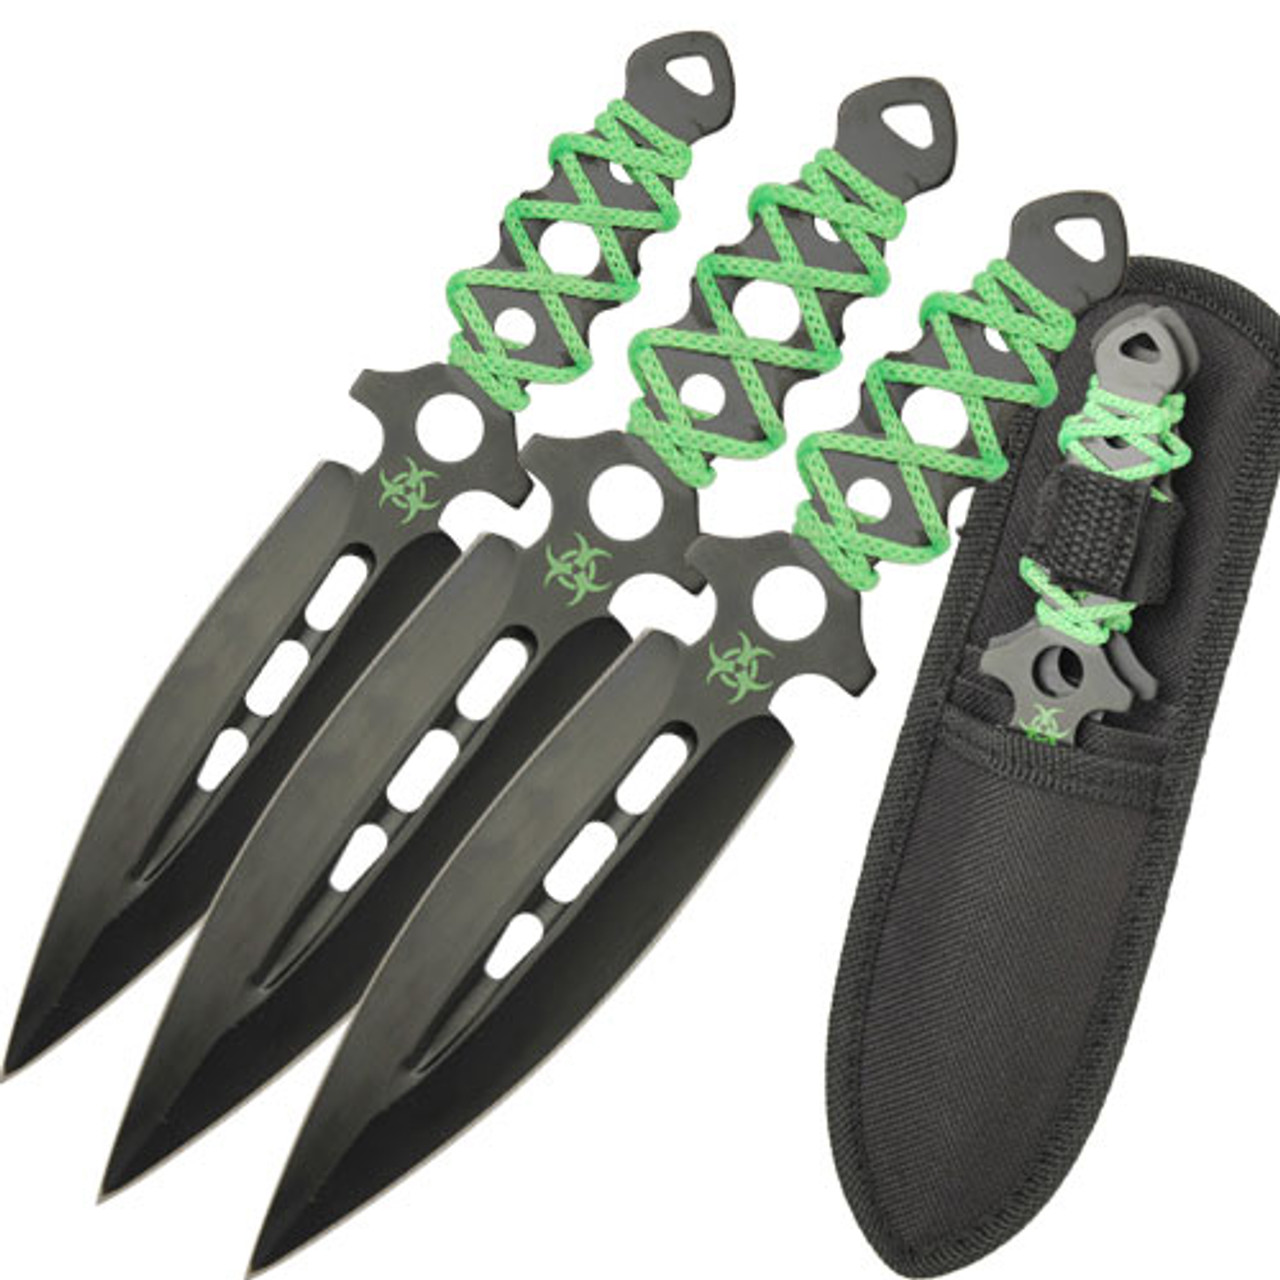 Smith & Wesson Throwing Knives 6-Pack - Academy